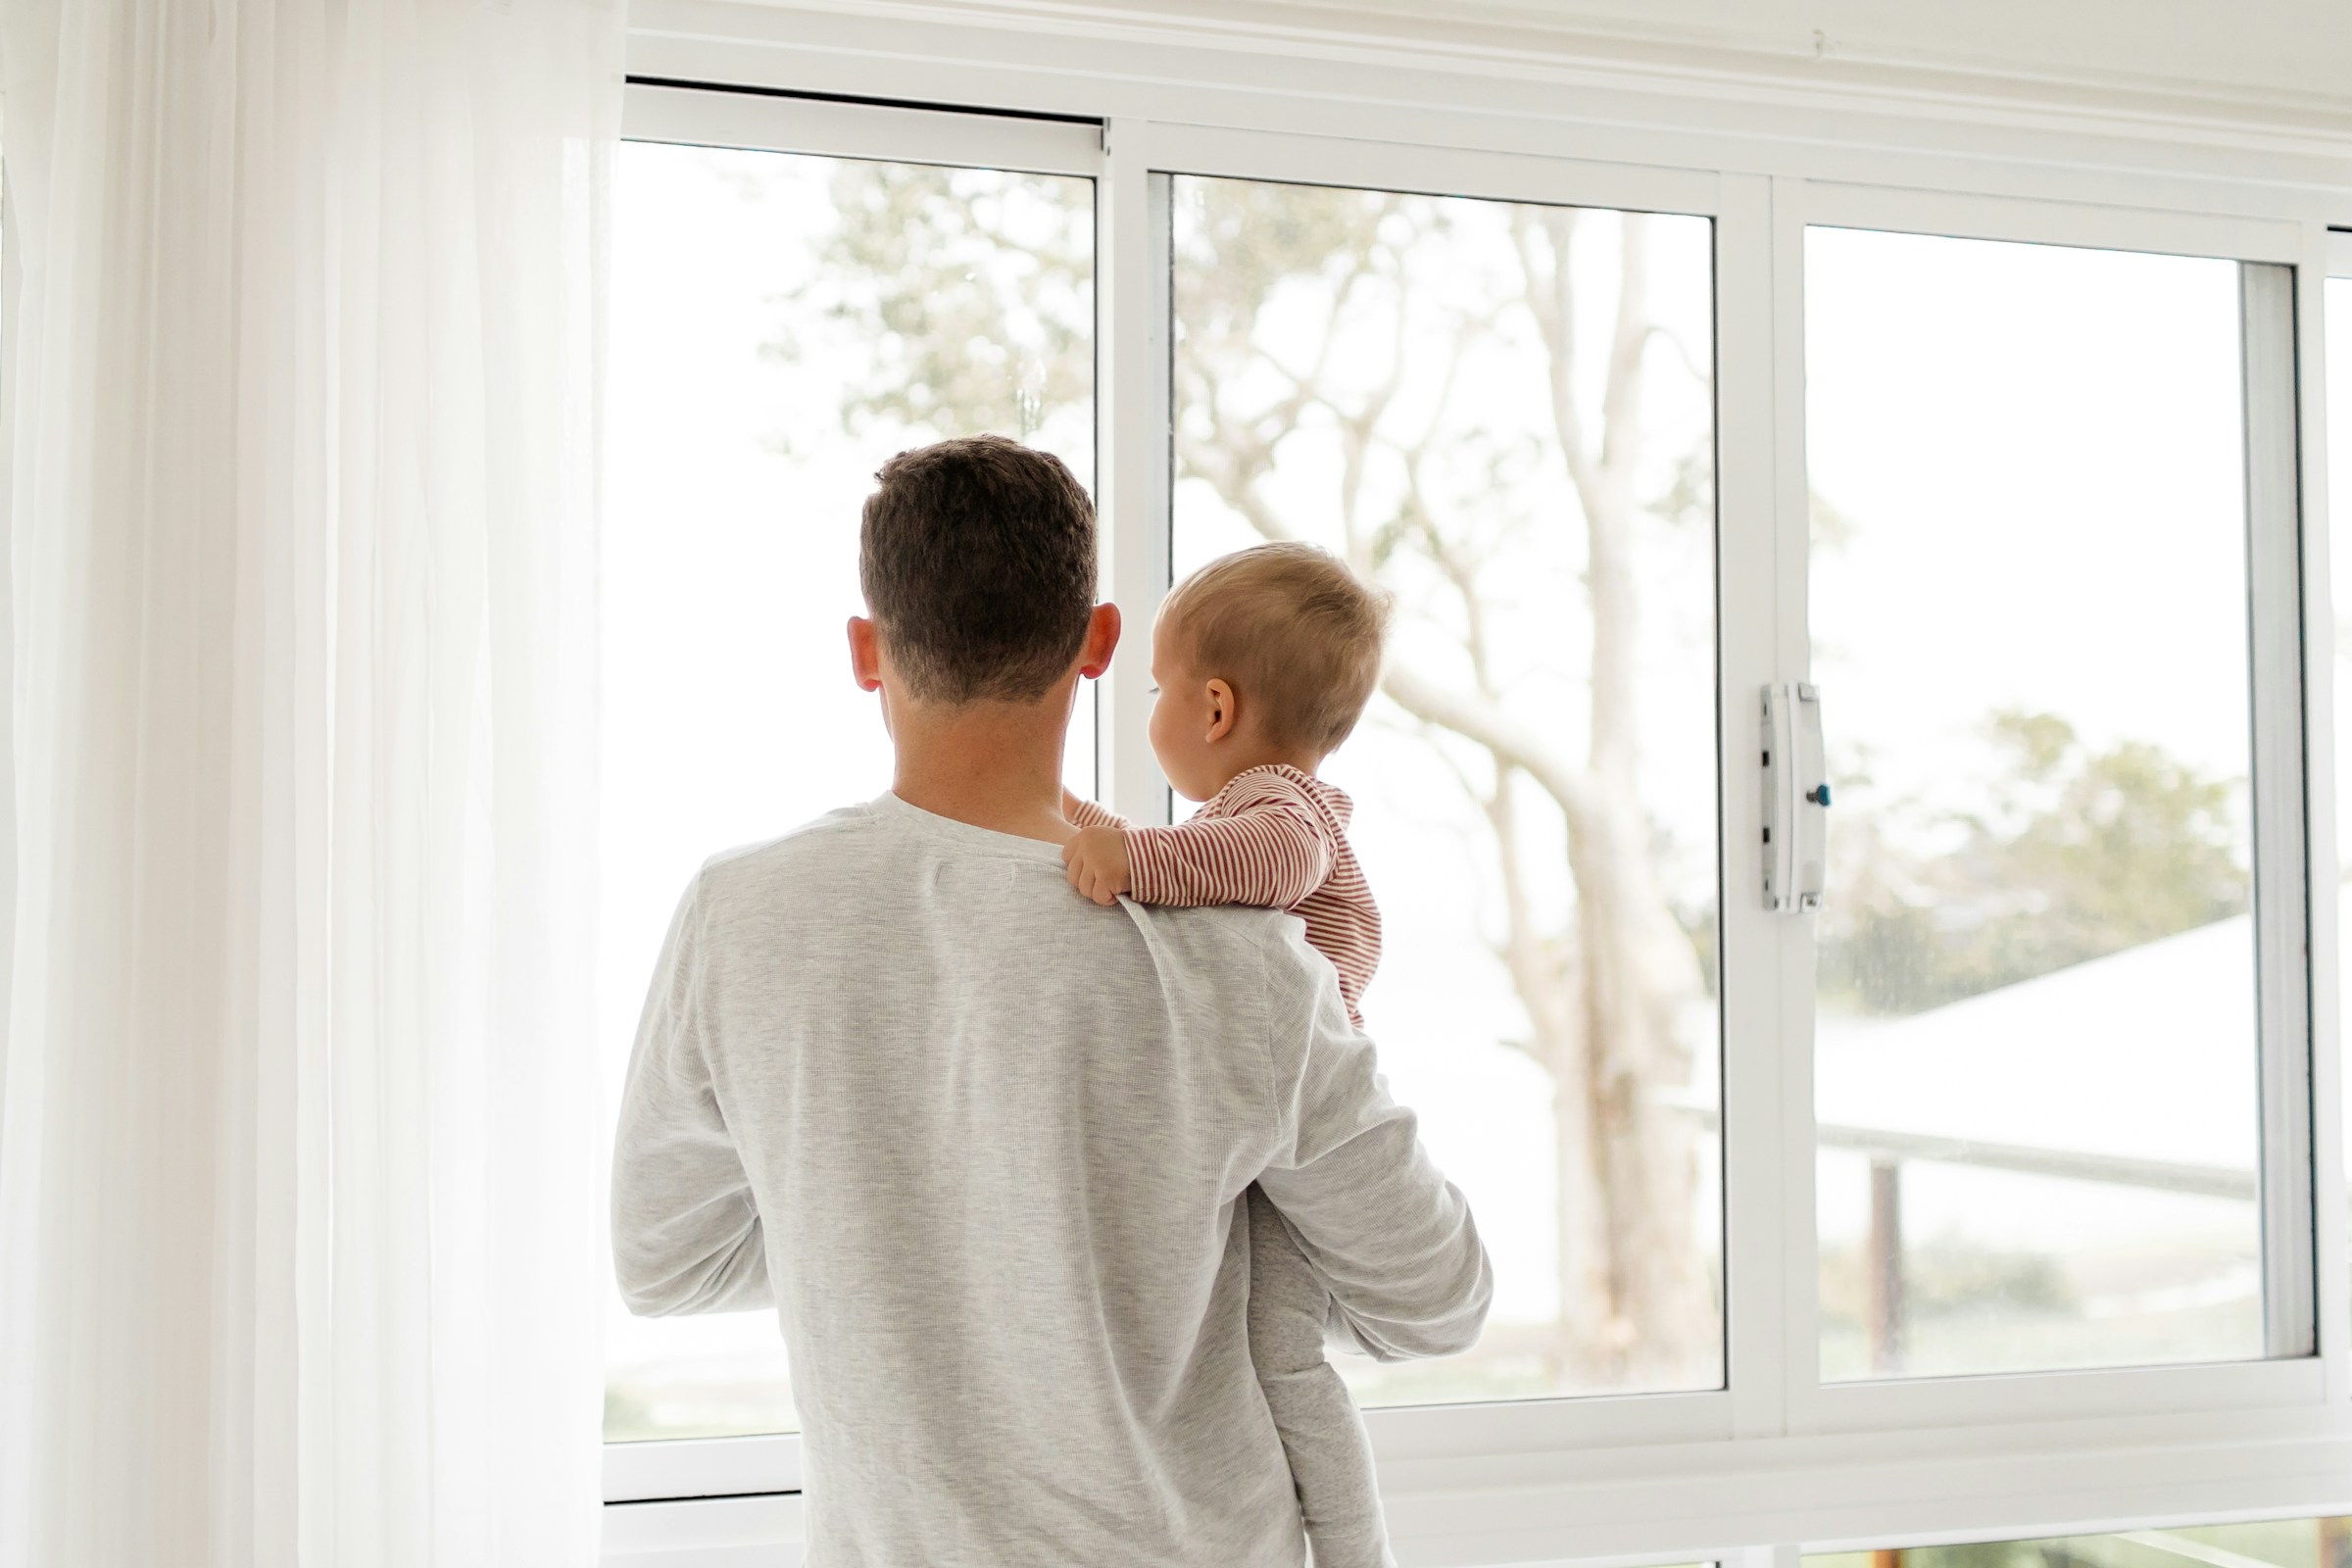 A man holding a baby looking through the window | Source: Pexels